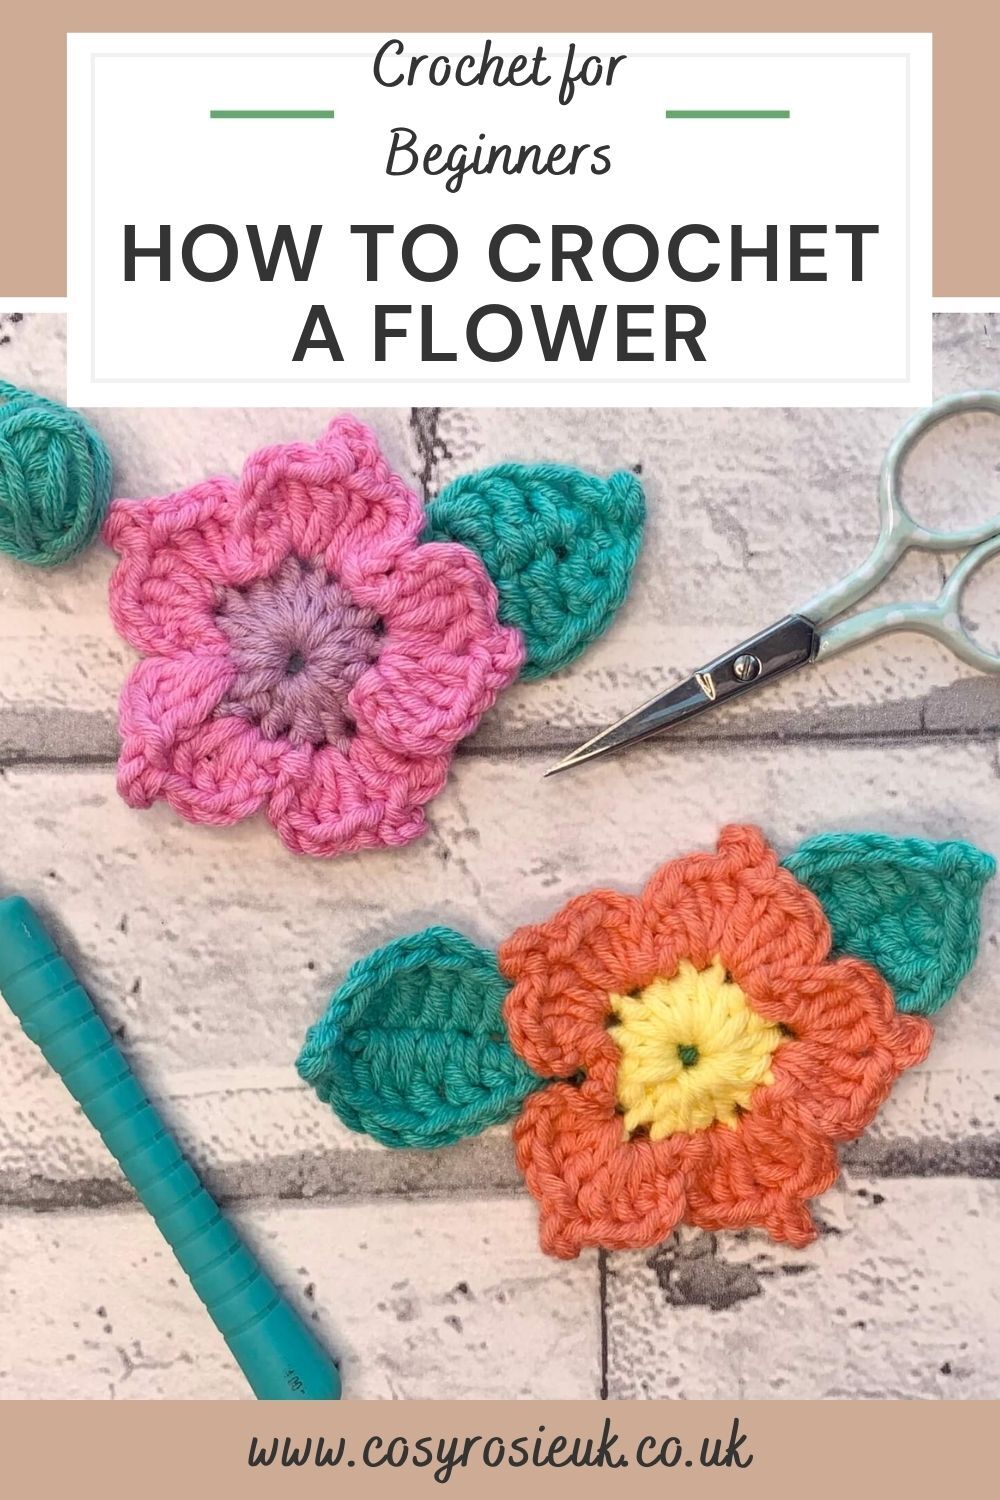 How to crochet a flower for beginners